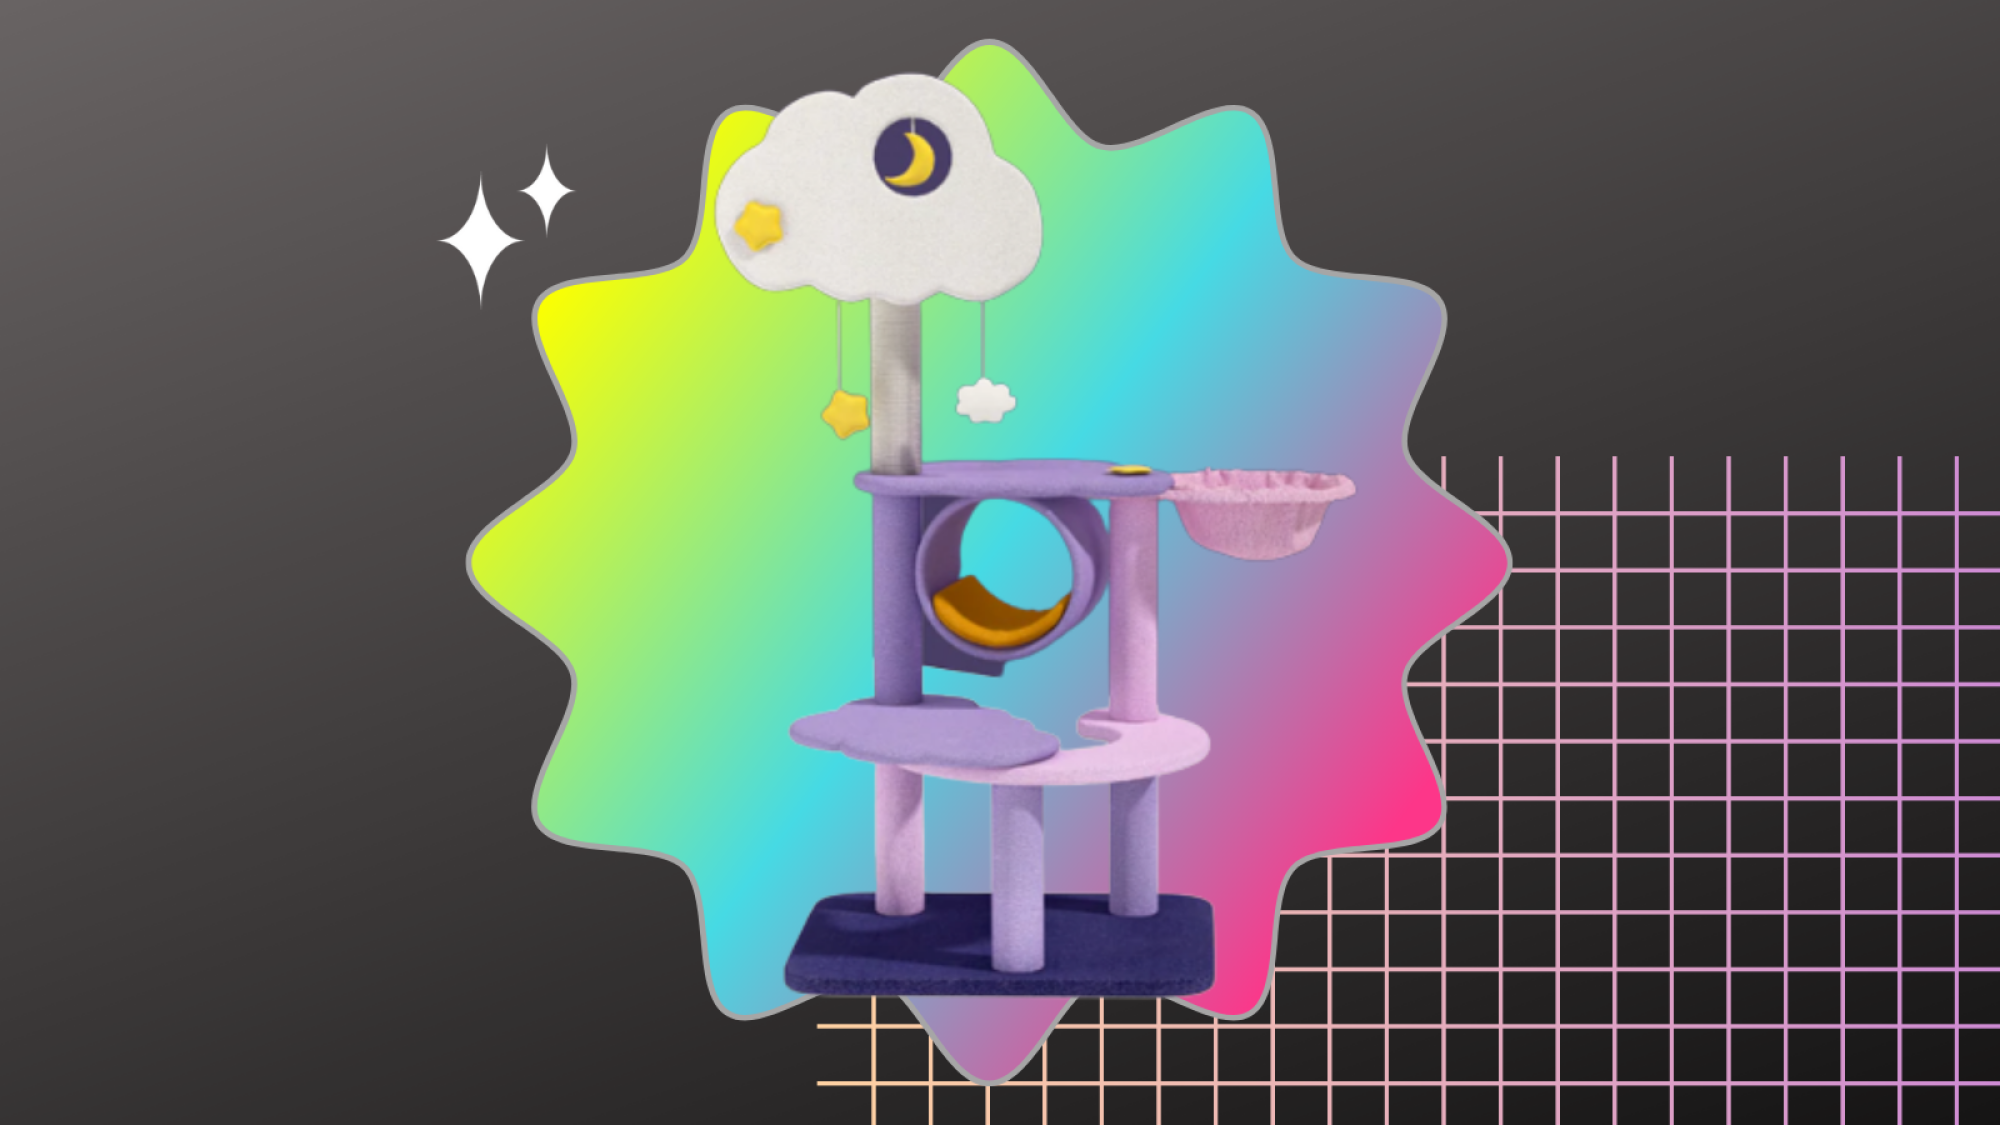 Sky-themed cat tree on gray graphic with colorful shapes